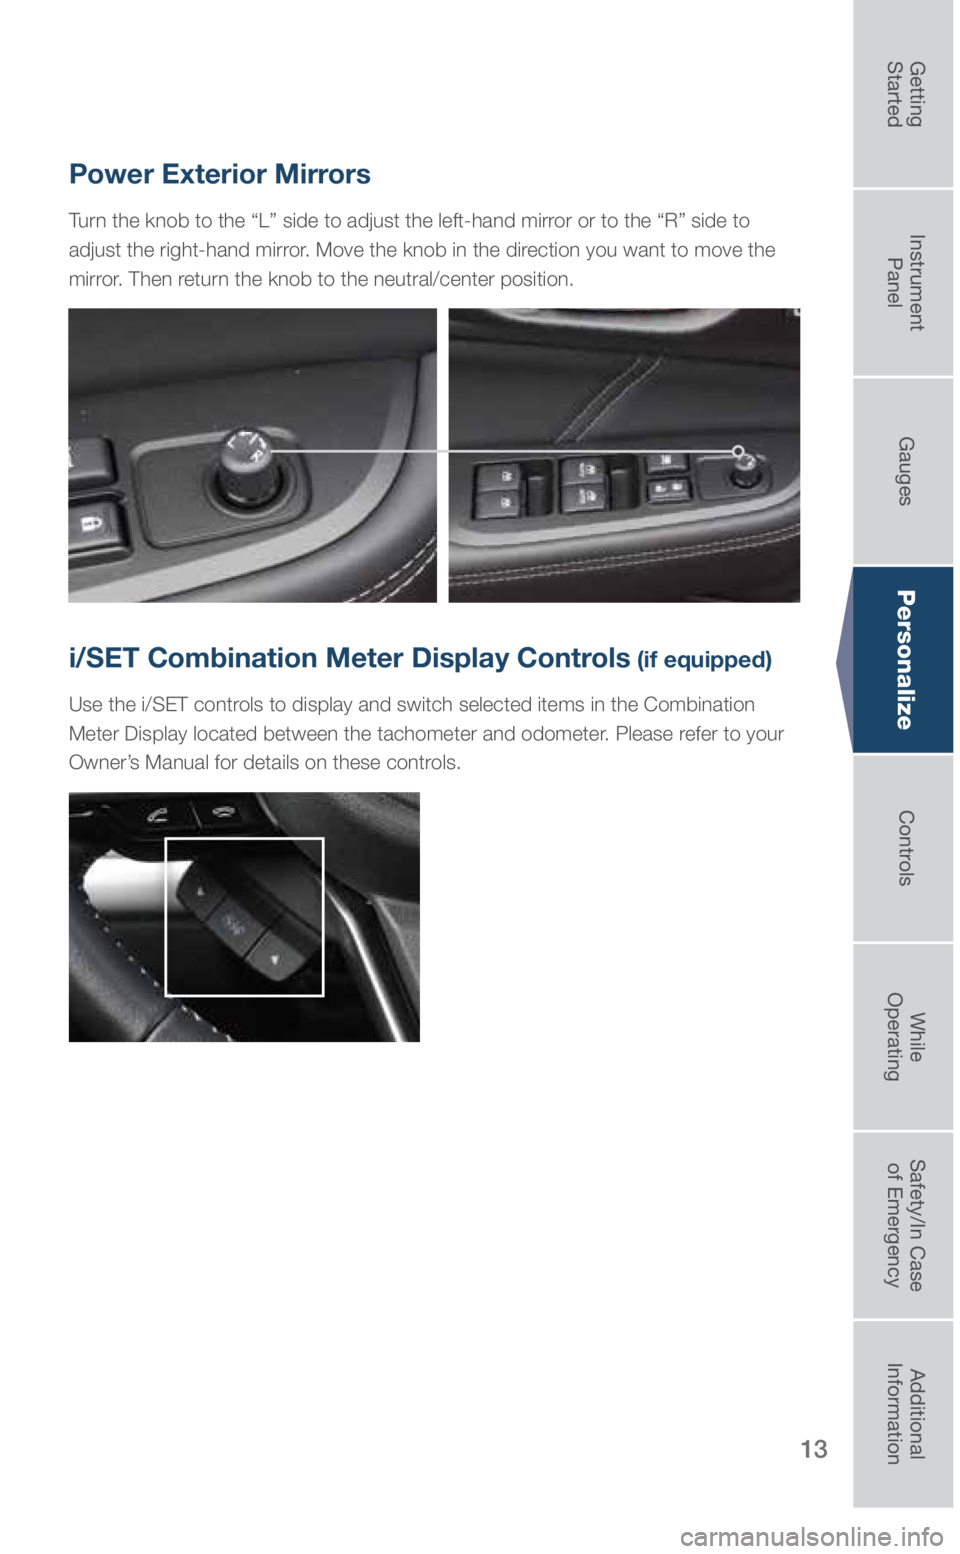 SUBARU OUTBACK 2019  Quick Guide 13
Personalize
Power Exterior Mirrors
Turn the knob to the “L” side to adjust the left-hand mirror or to the “R” side to 
adjust the right-hand mirror. Move the knob in the direction you want 